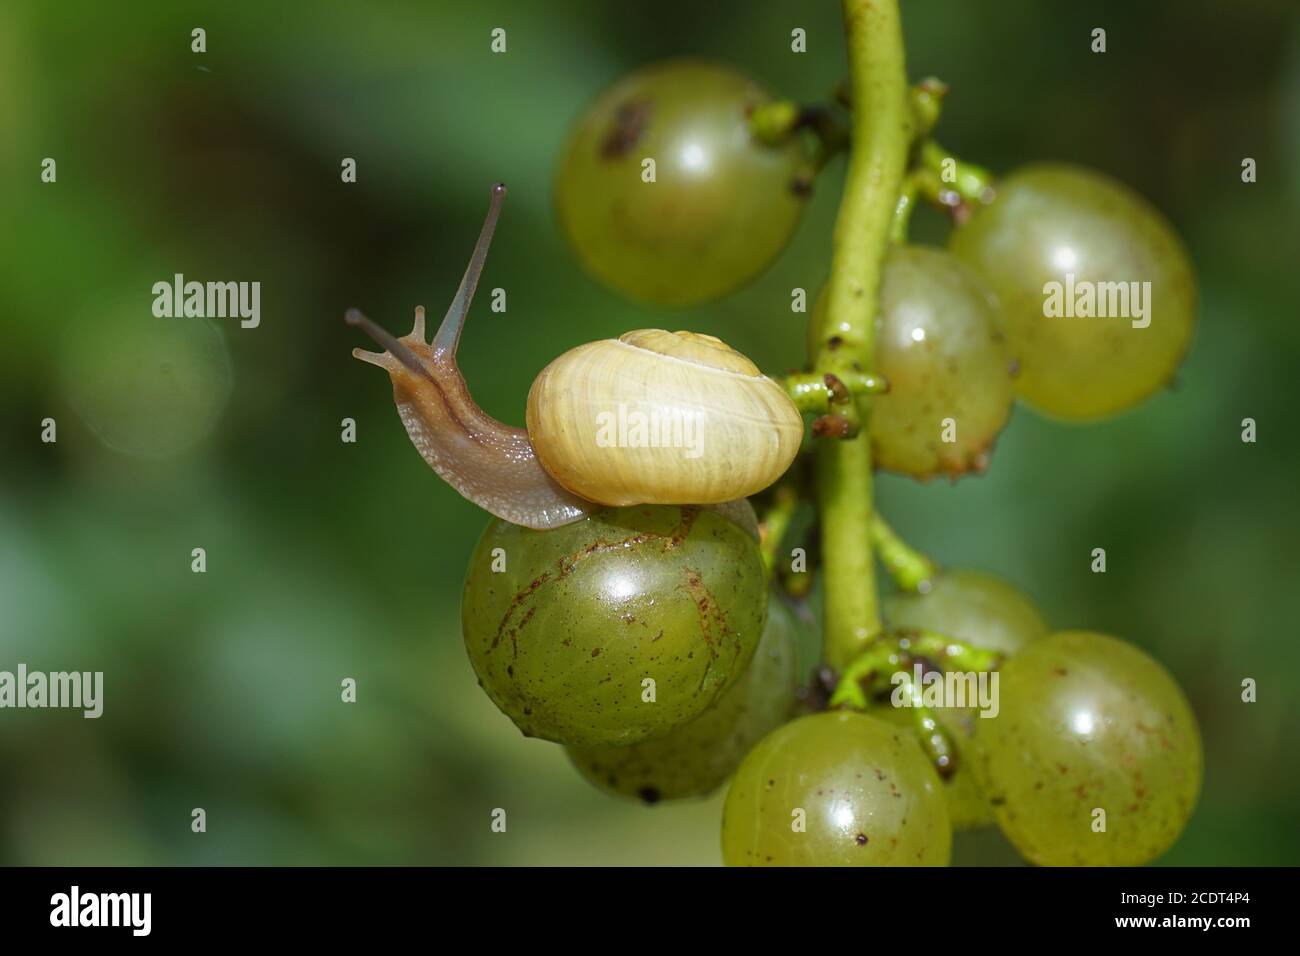 A grove snail (Cepaea nemoralis) on a bunch of grapes. Family Helicidae. August, in a Dutch garden. Netherlands. Stock Photo